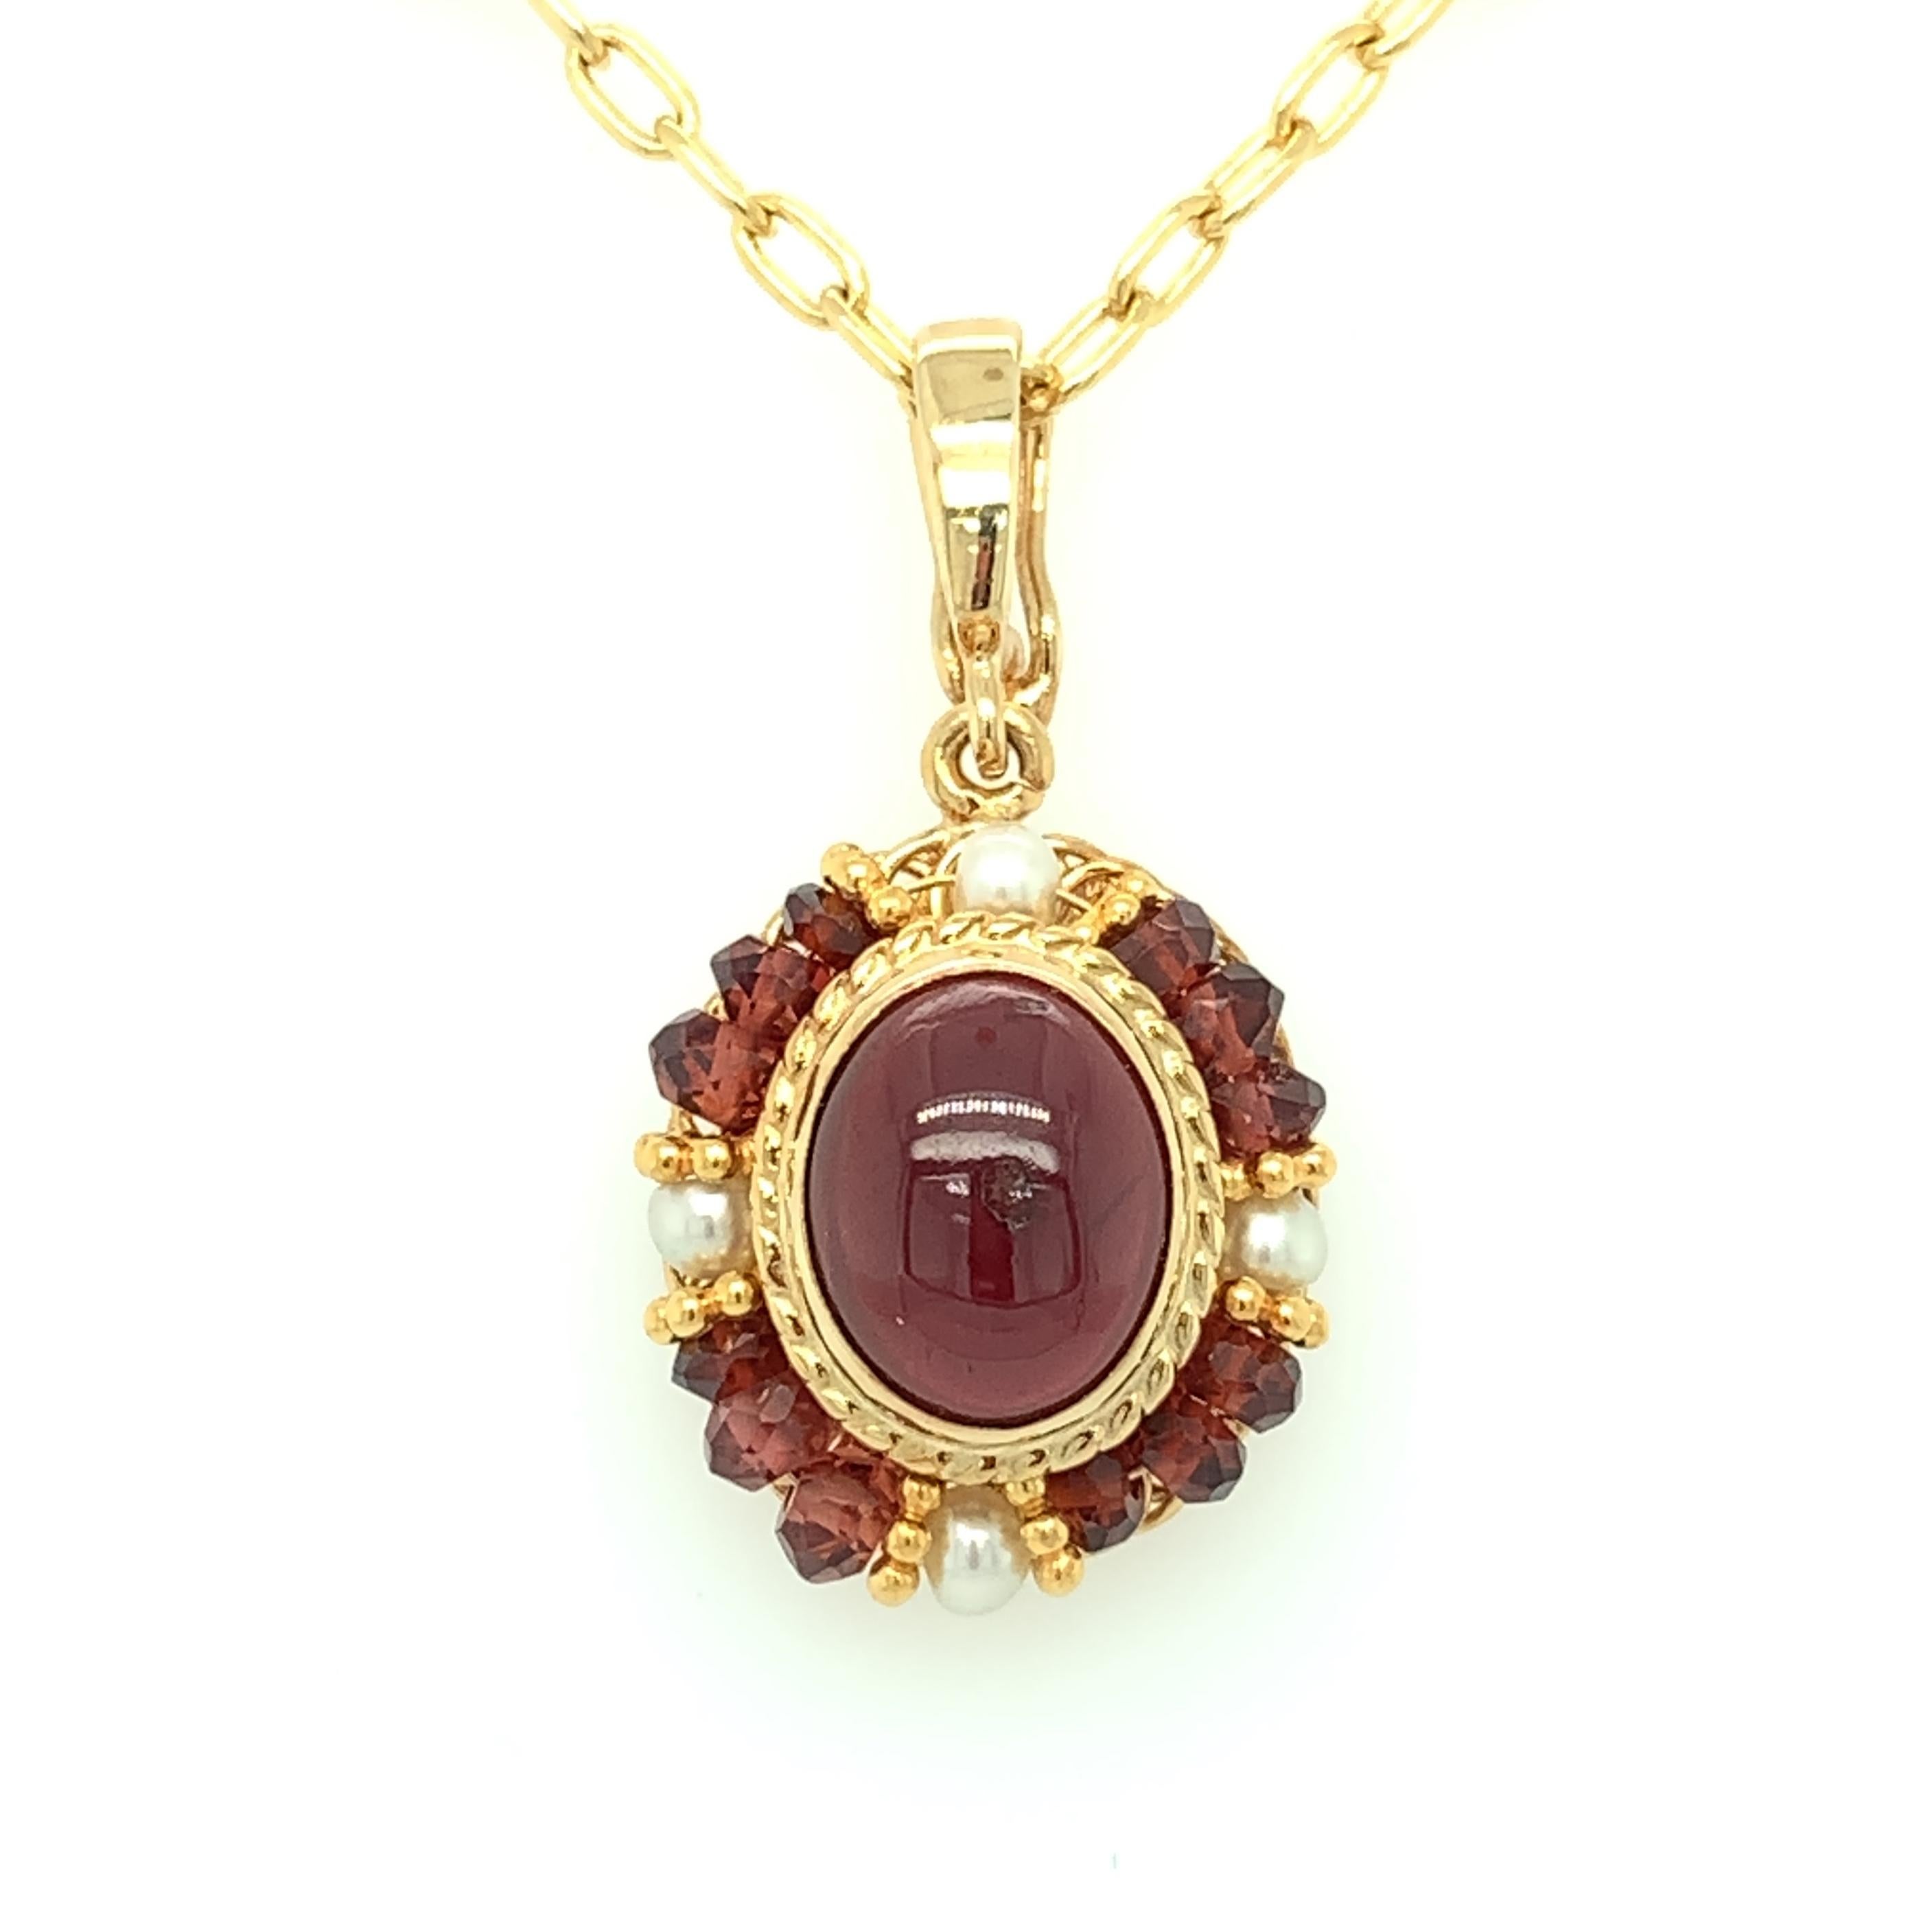 This pendant features a beautiful oval garnet cabochon in an intricate design of handmade 18k yellow gold filigree. The richly colored garnet is bezel set and framed by a halo of seed pearls and delicate garnet beads that have been hand strung on